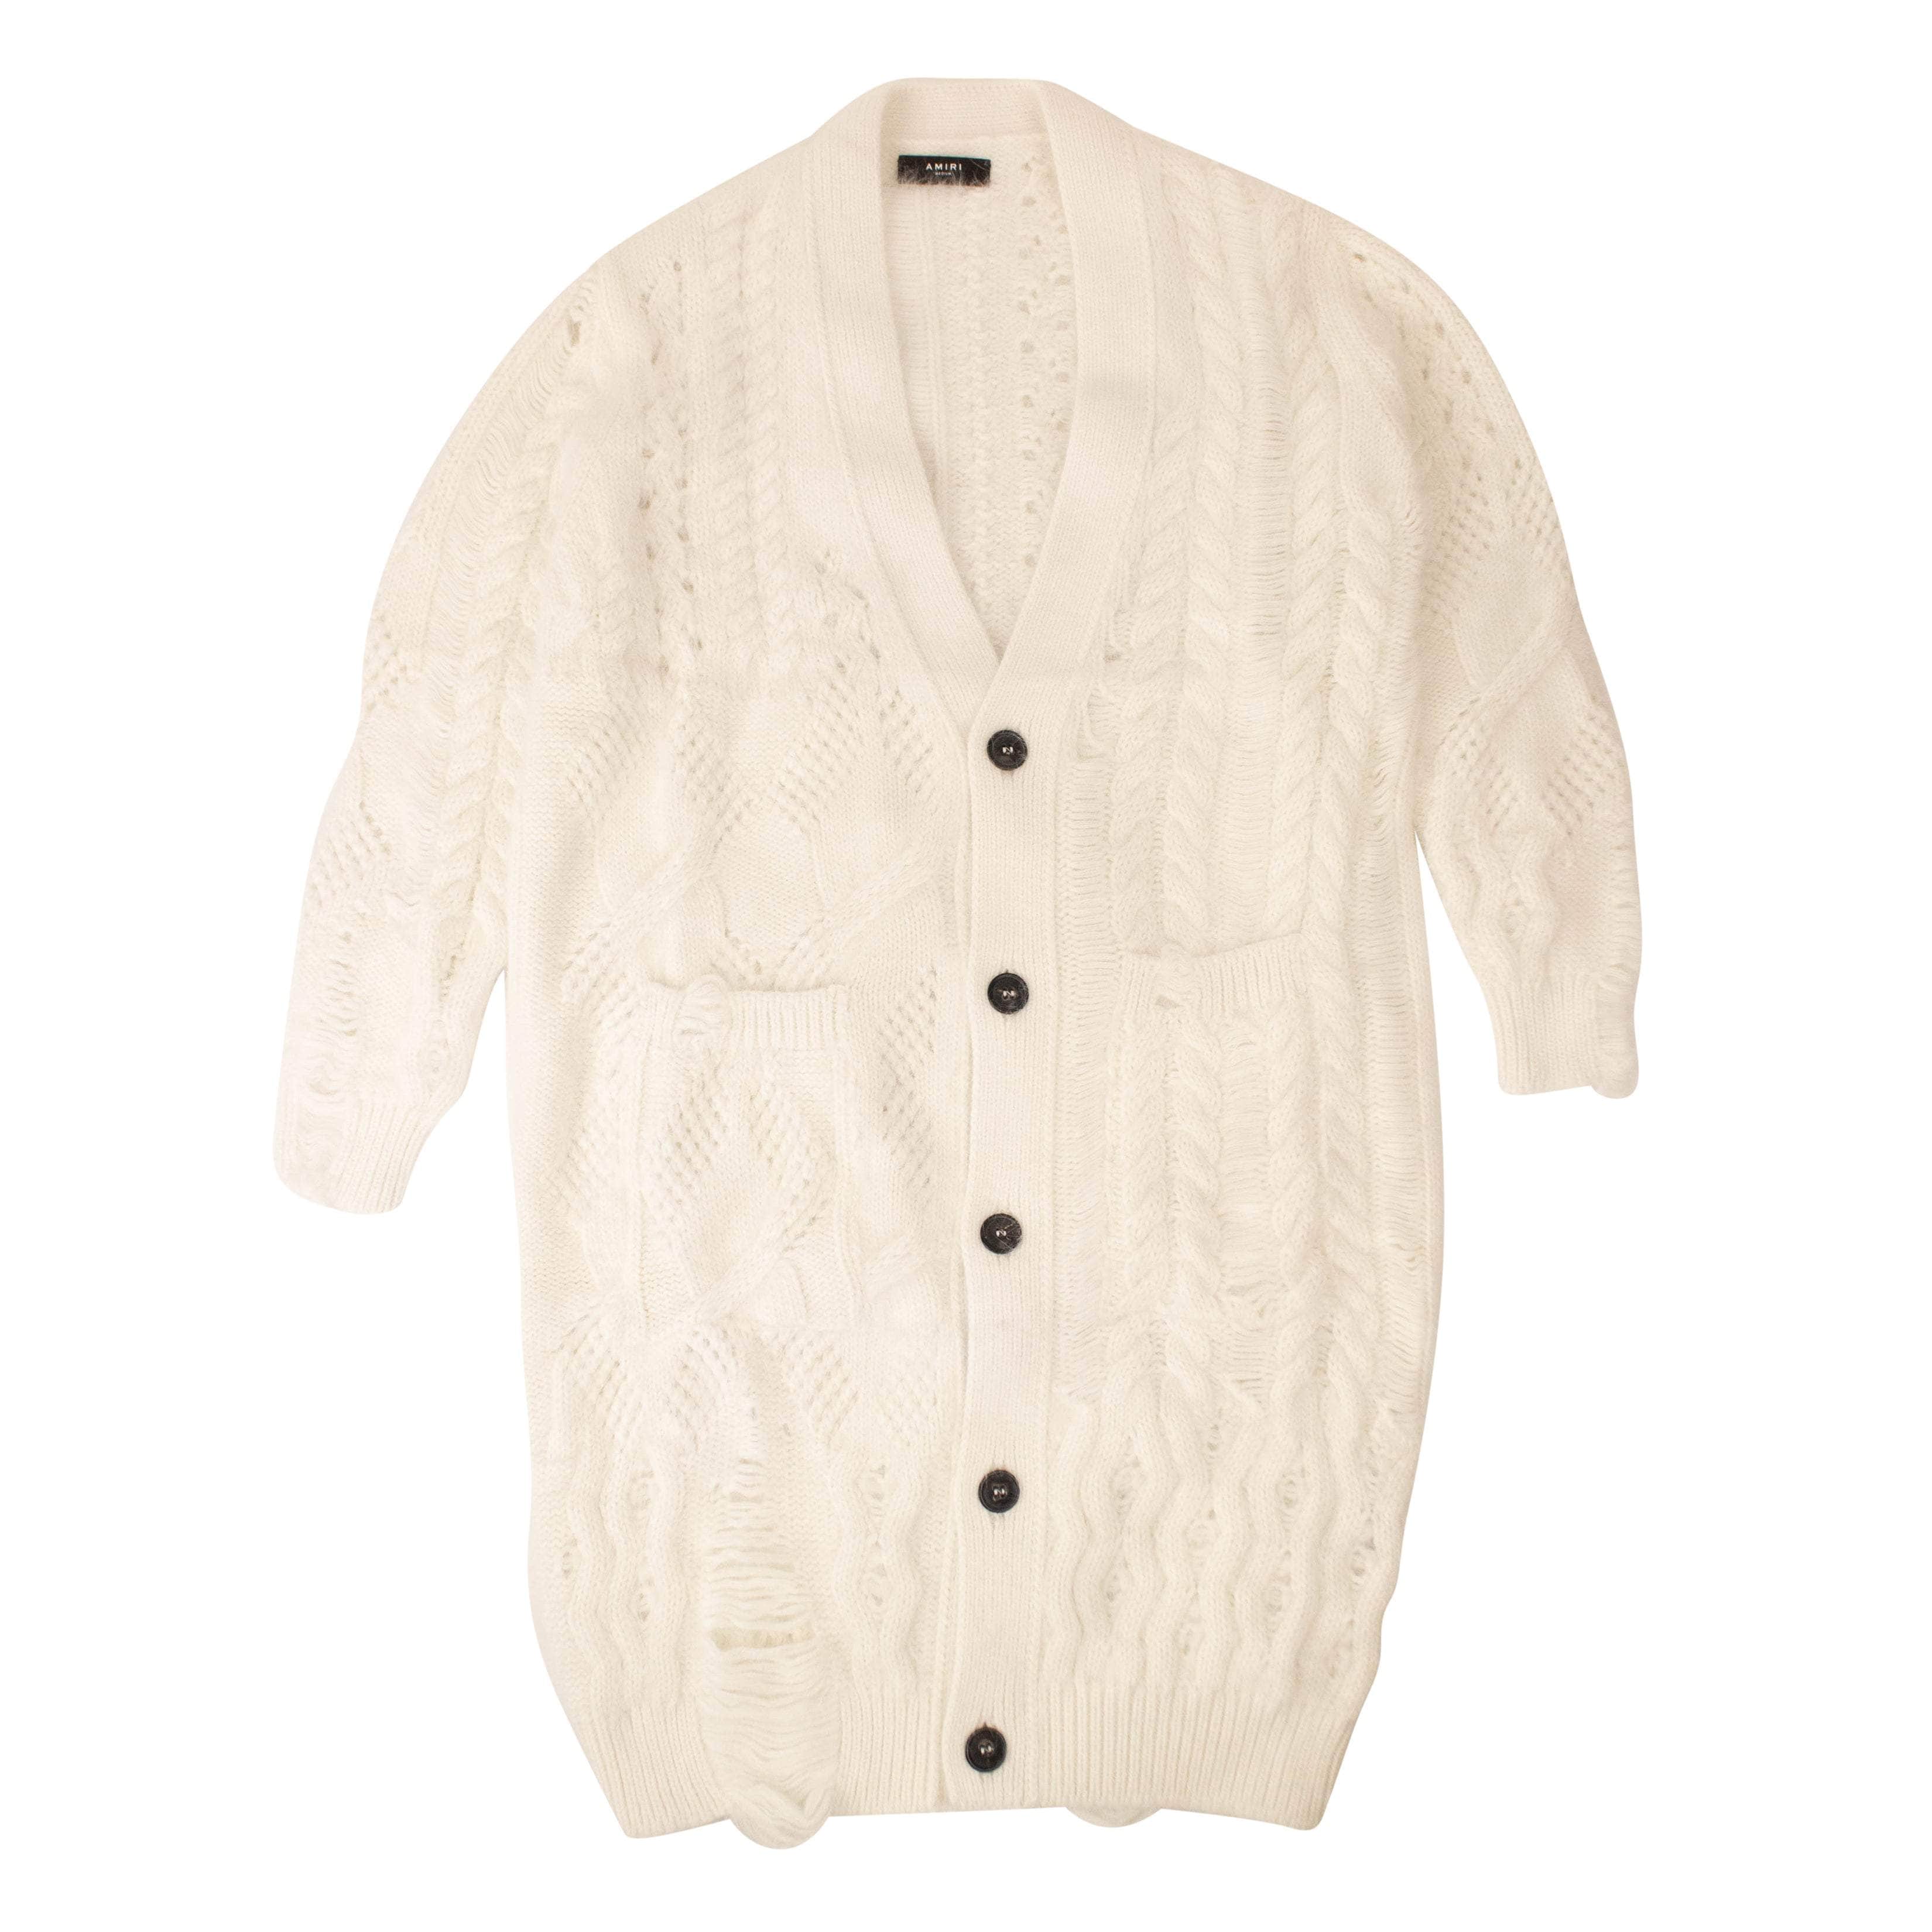 Amiri 500-750, amiri, AMR, AWC1, channelenable-all, chicmi, couponcollection, gender-womens, main-clothing, size-s, size-xs, SPO, womens-cardigans Women's Cream Amiri Angora Multipoint Cardigan